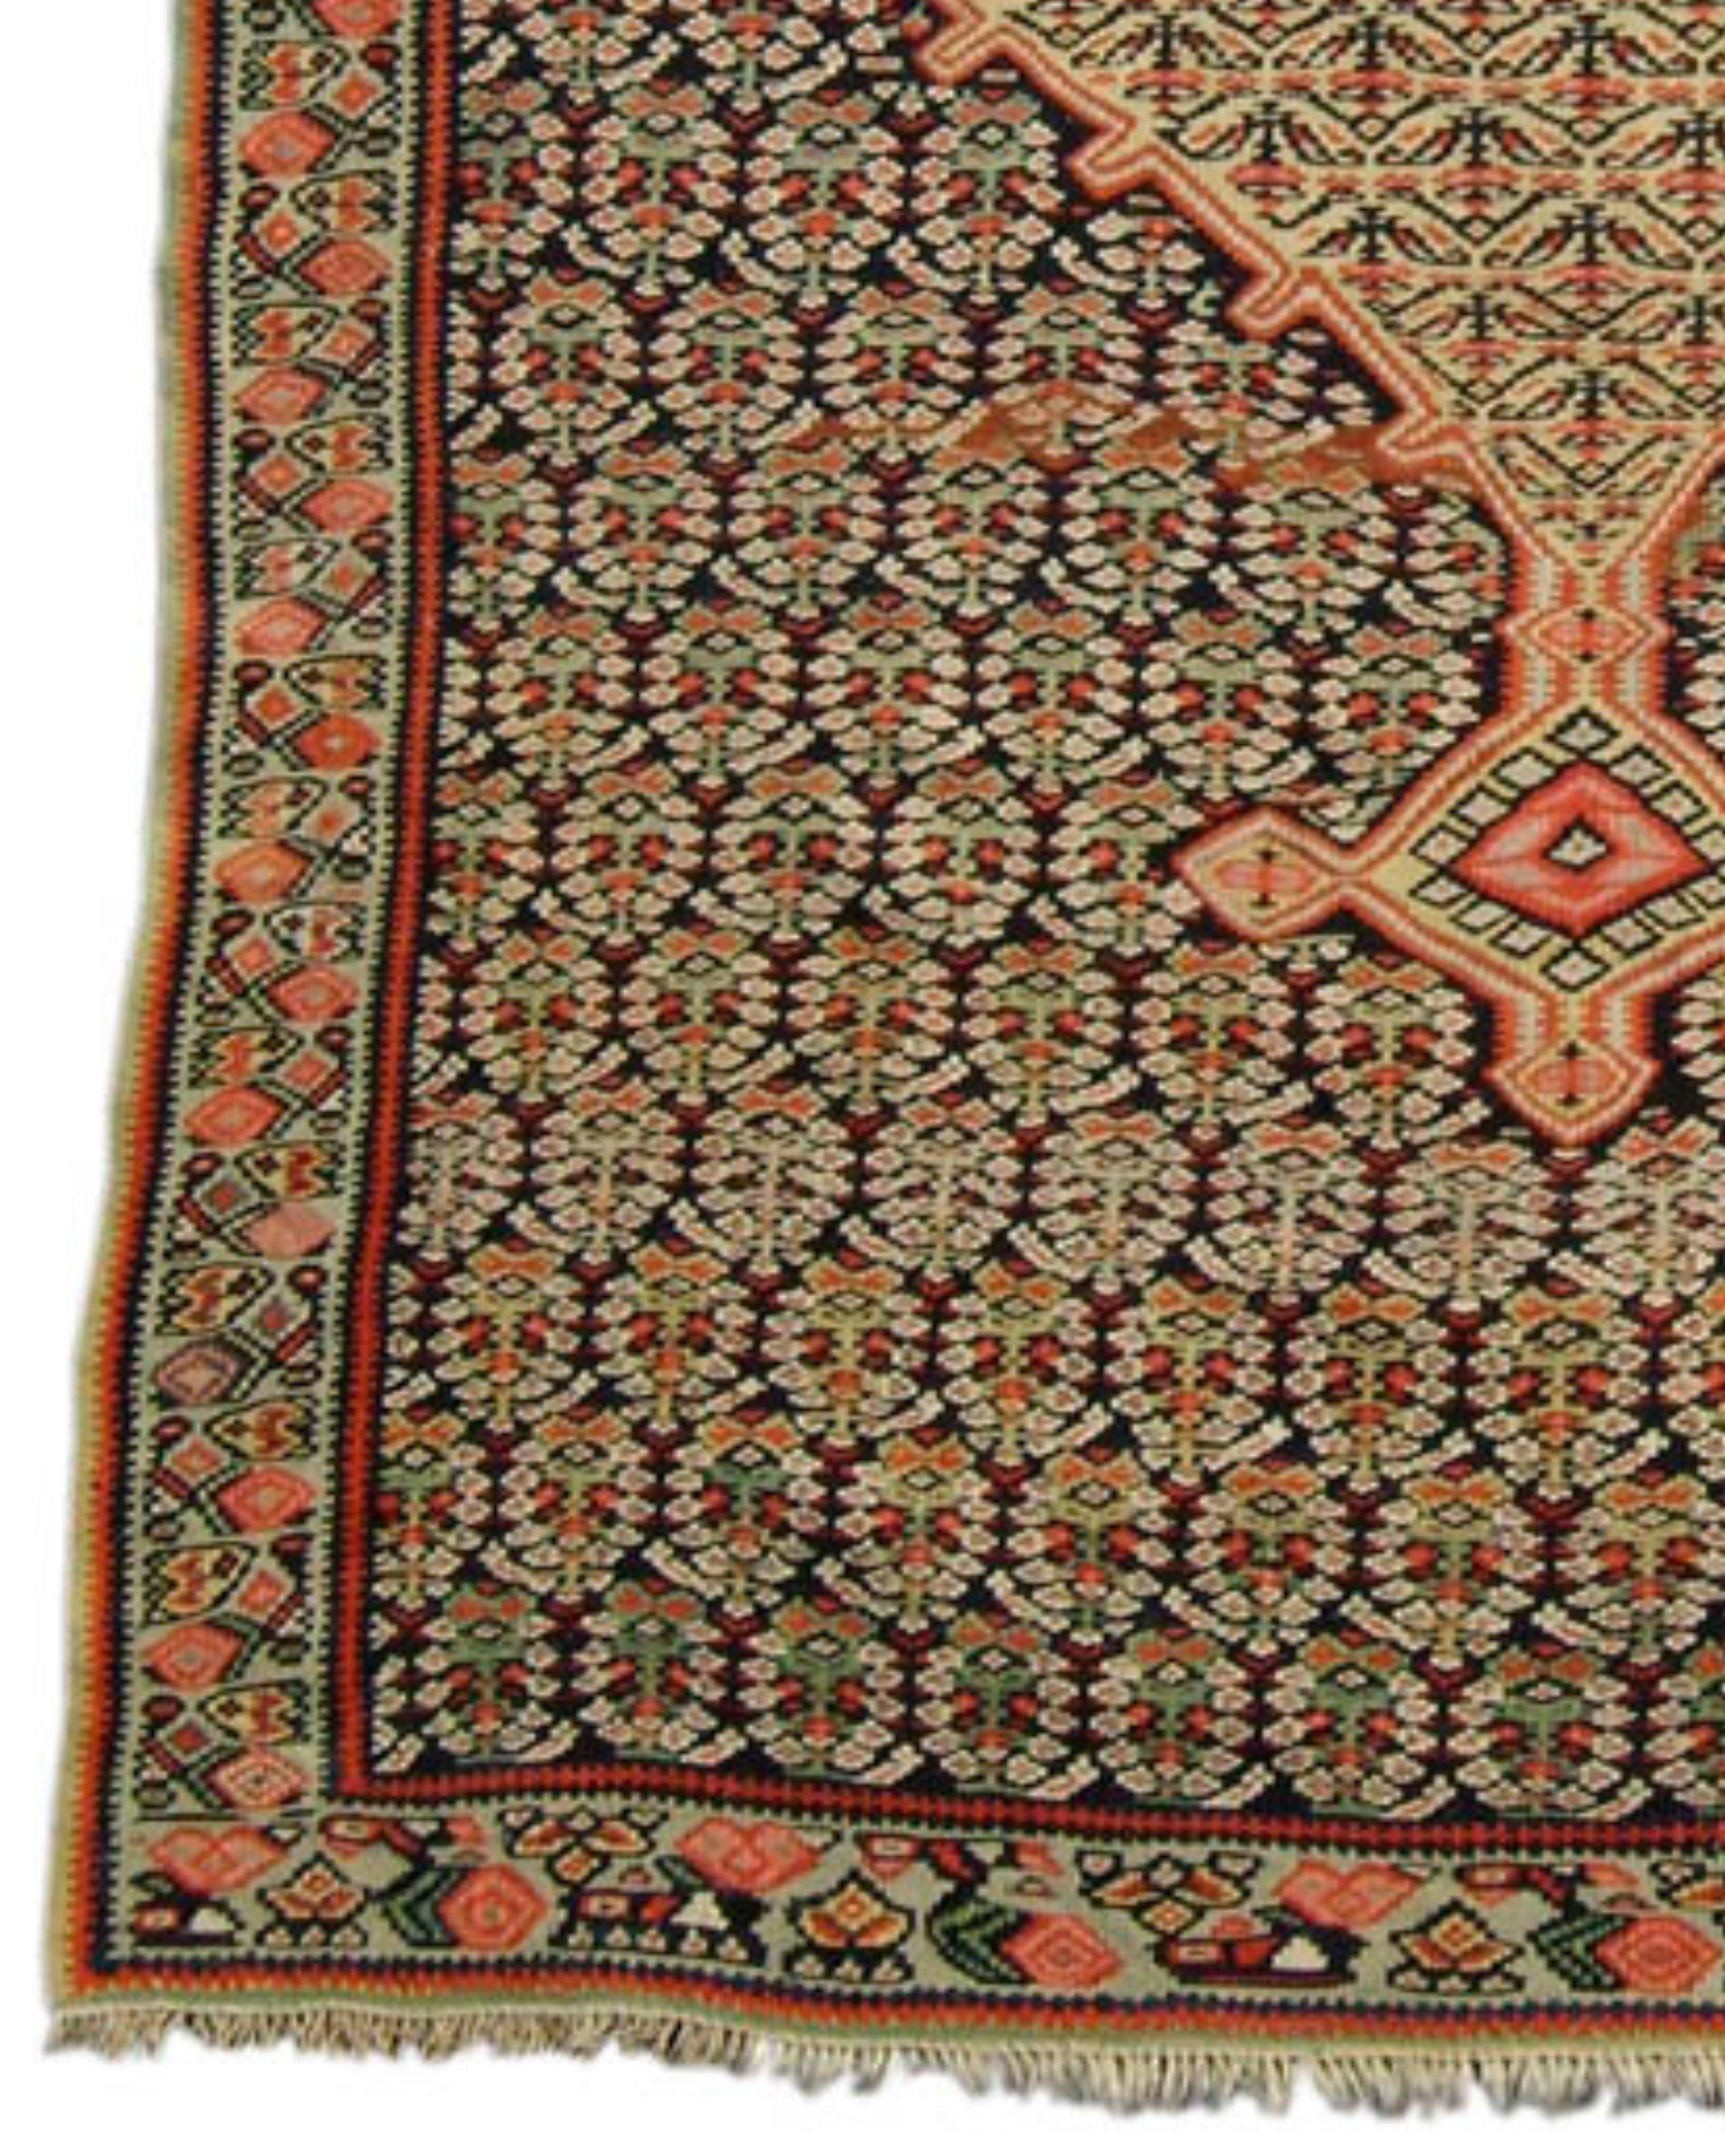 Antique Persian Senneh Kilim Rug, 19th Century In Excellent Condition For Sale In San Francisco, CA